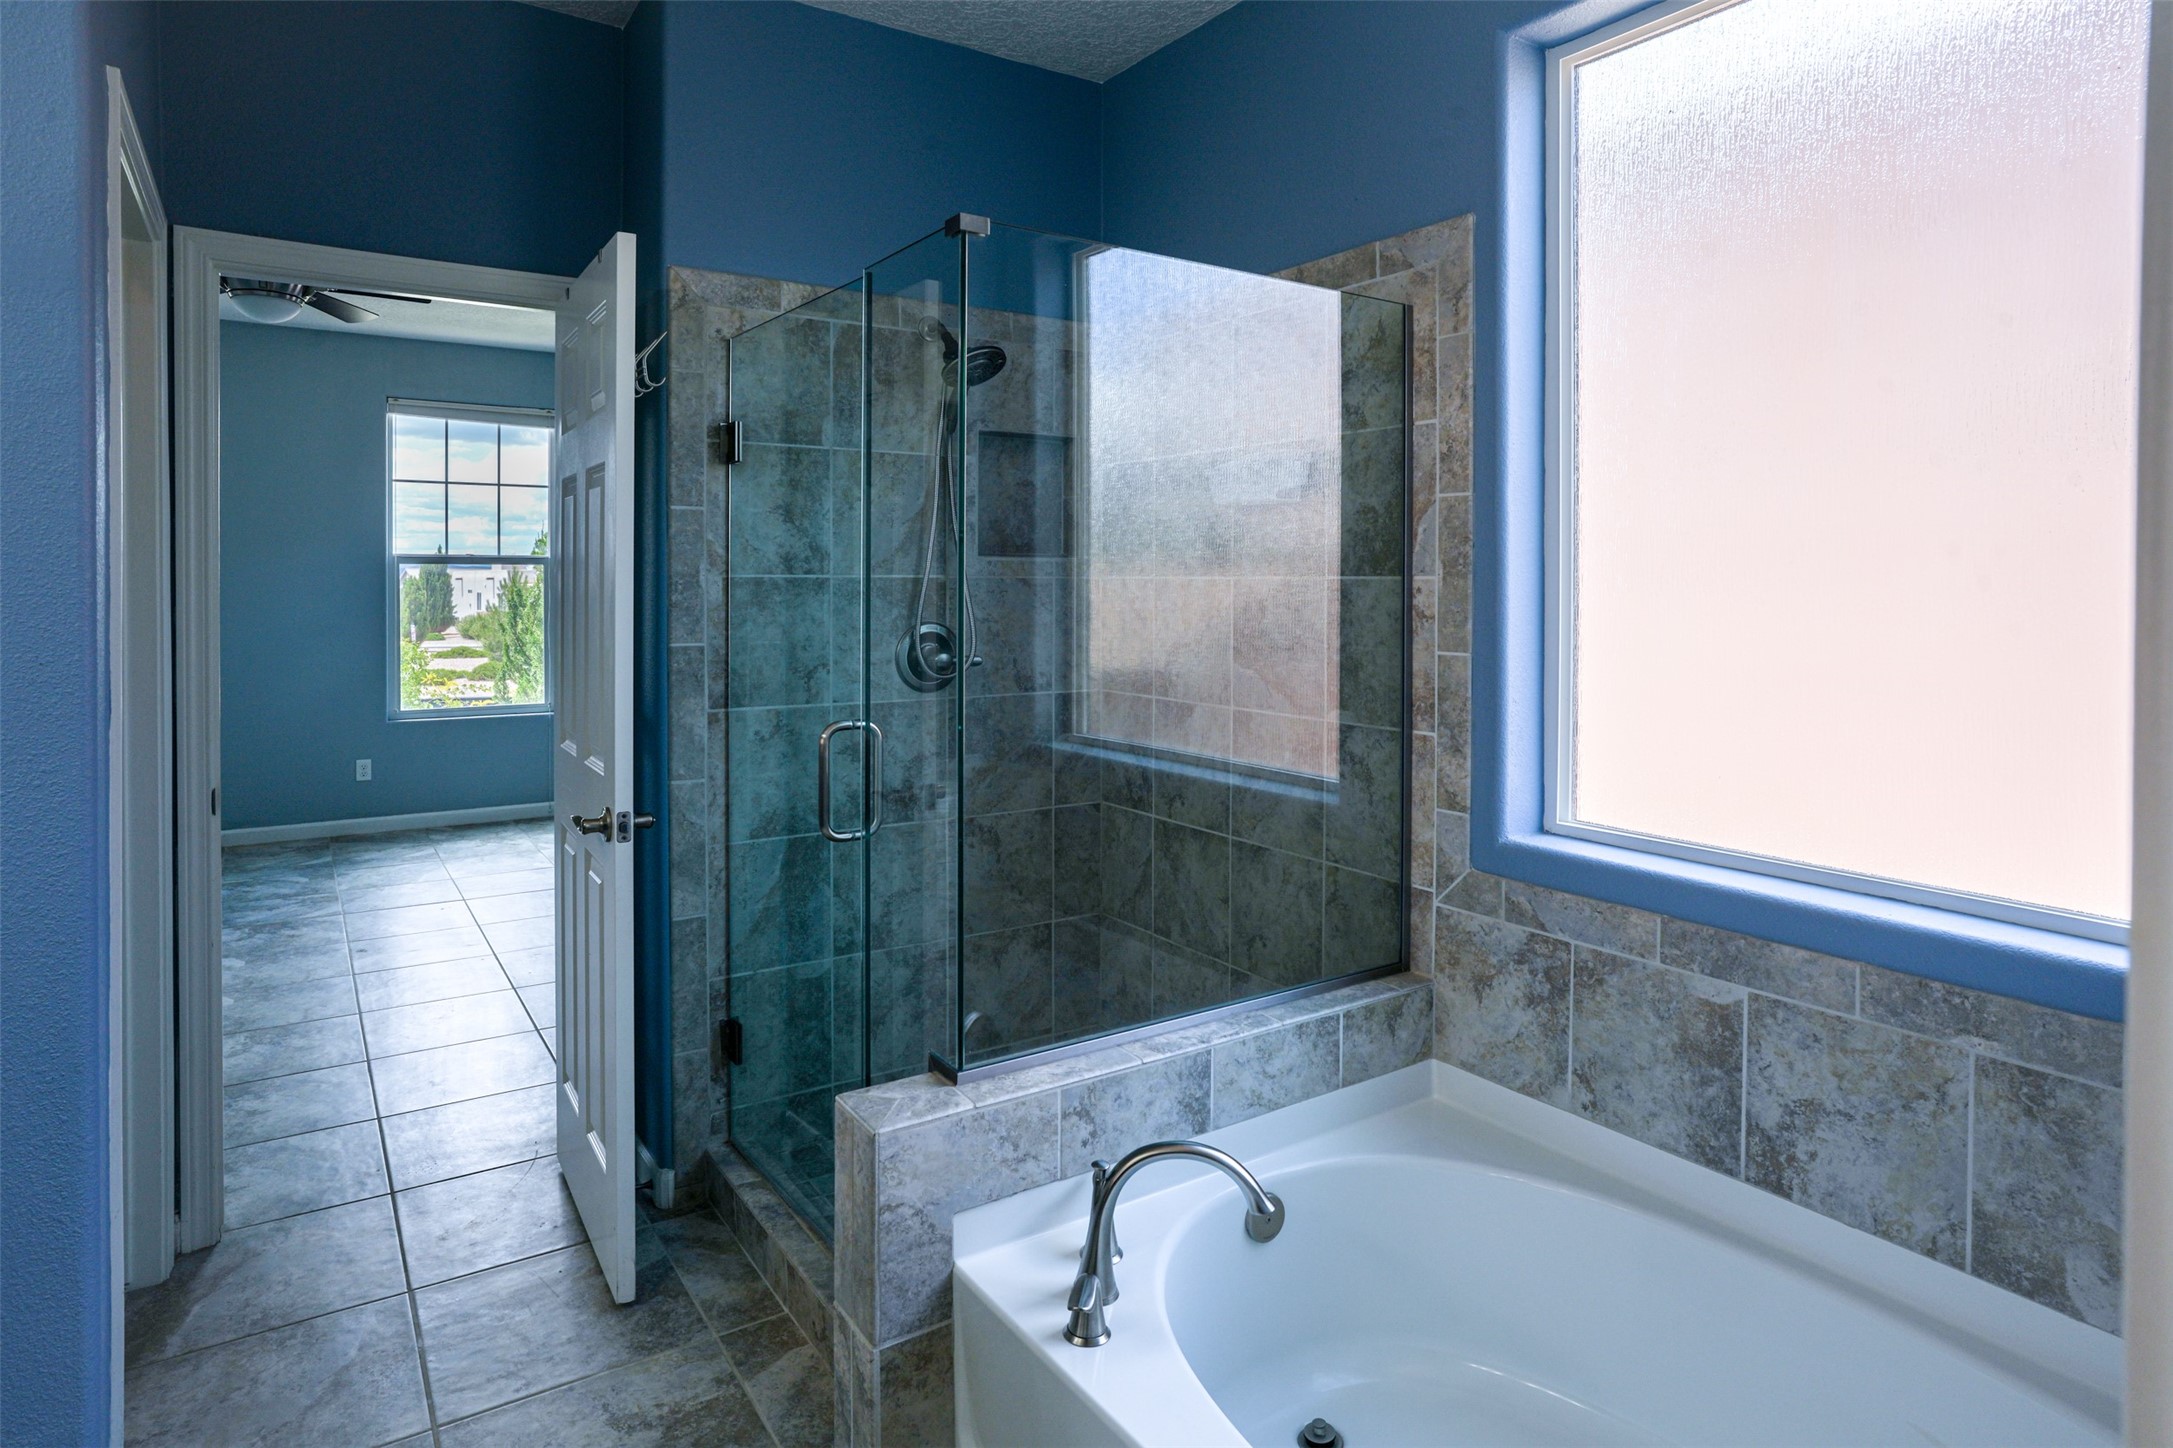 PRIMARY BATHROOM WITH ENCLOSED SHOWER AREA AND BATHTUB